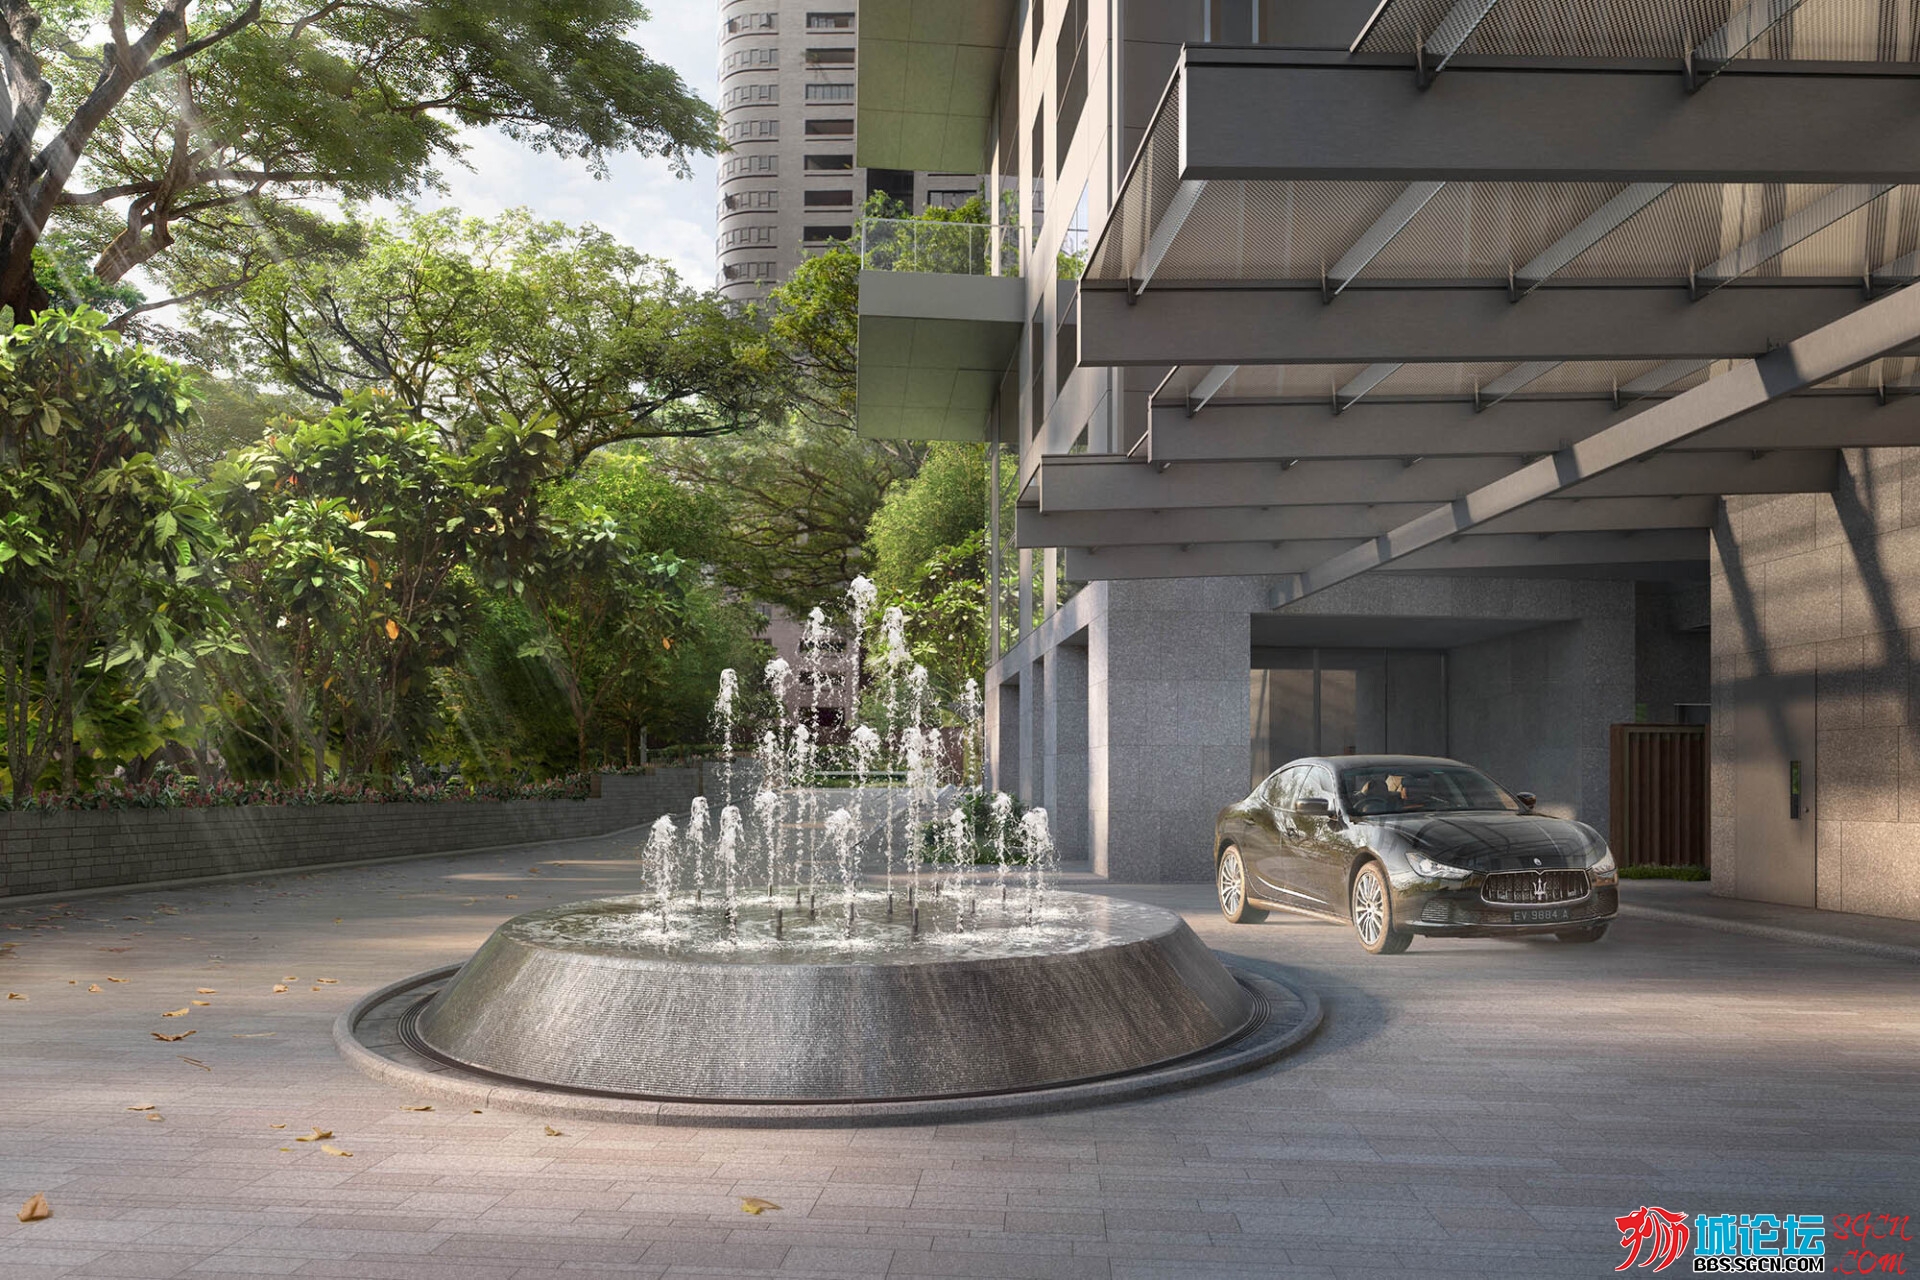 3-orchard-by-the-park-photo-singapore-new-launch-condominium-7db91eb9442a5129c06.jpg